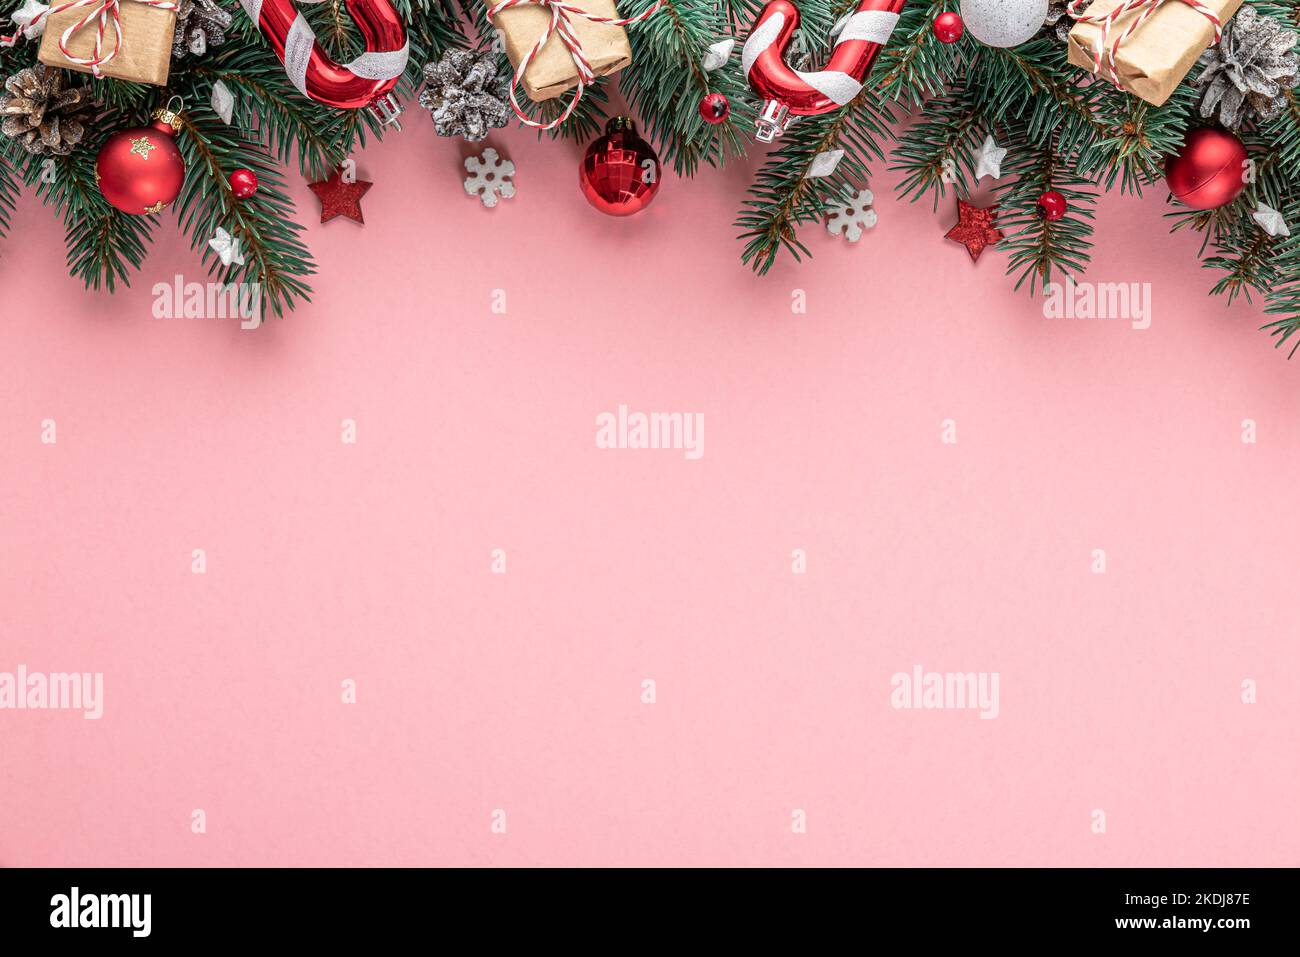 Christmas background with fir tree, holiday decorations, gift boxes on pink background. Flat lay. Top view with copy space. Festive background Stock Photo